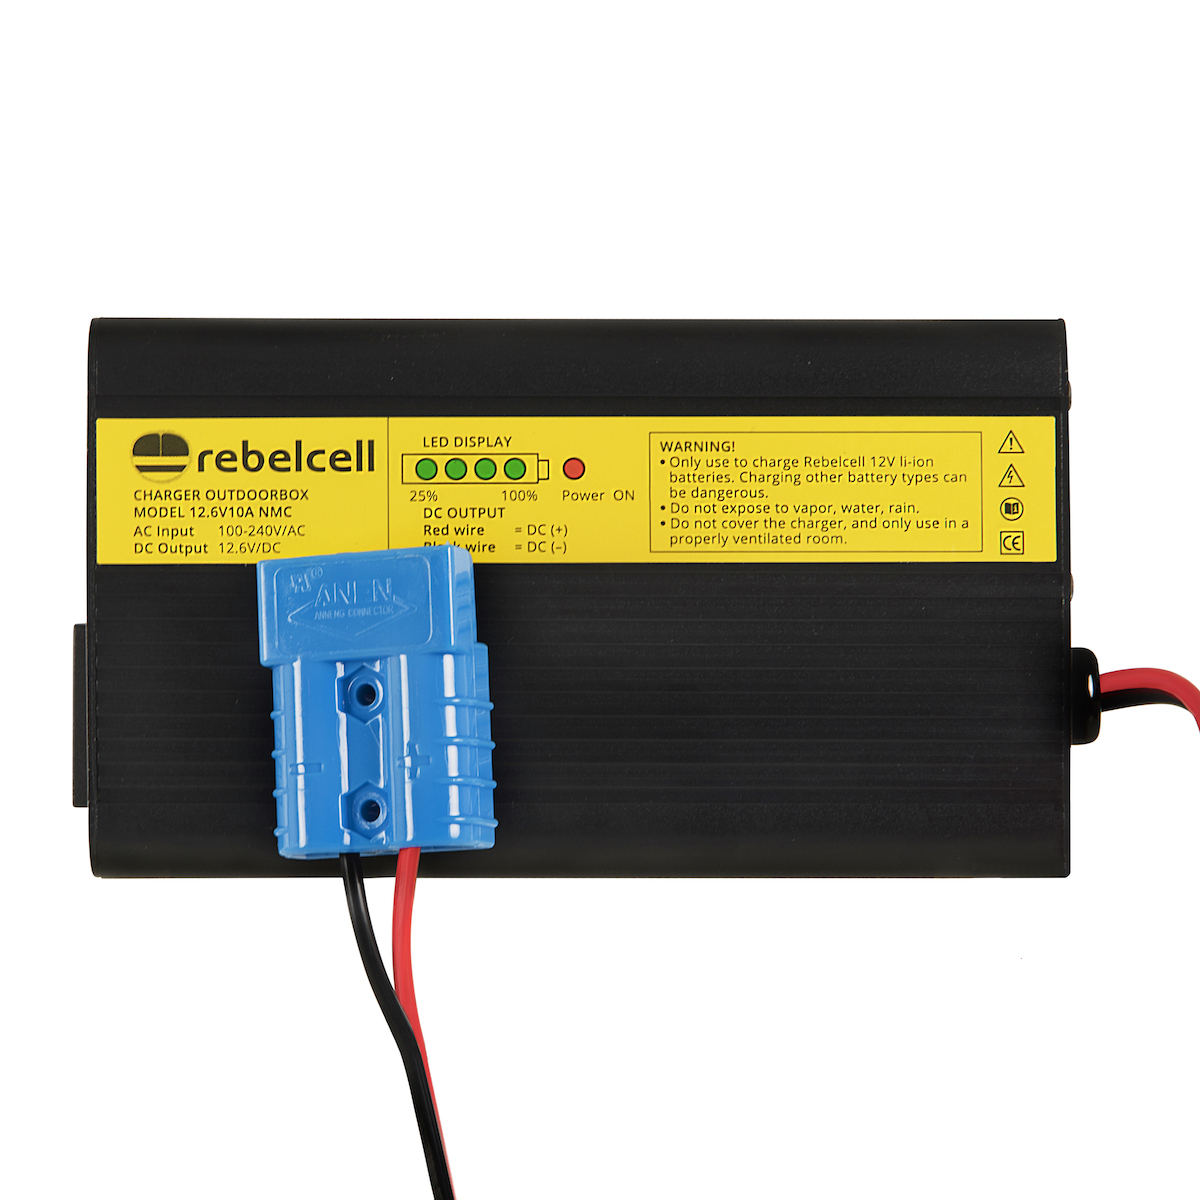 Rebelcell charger 12.6V10A product image